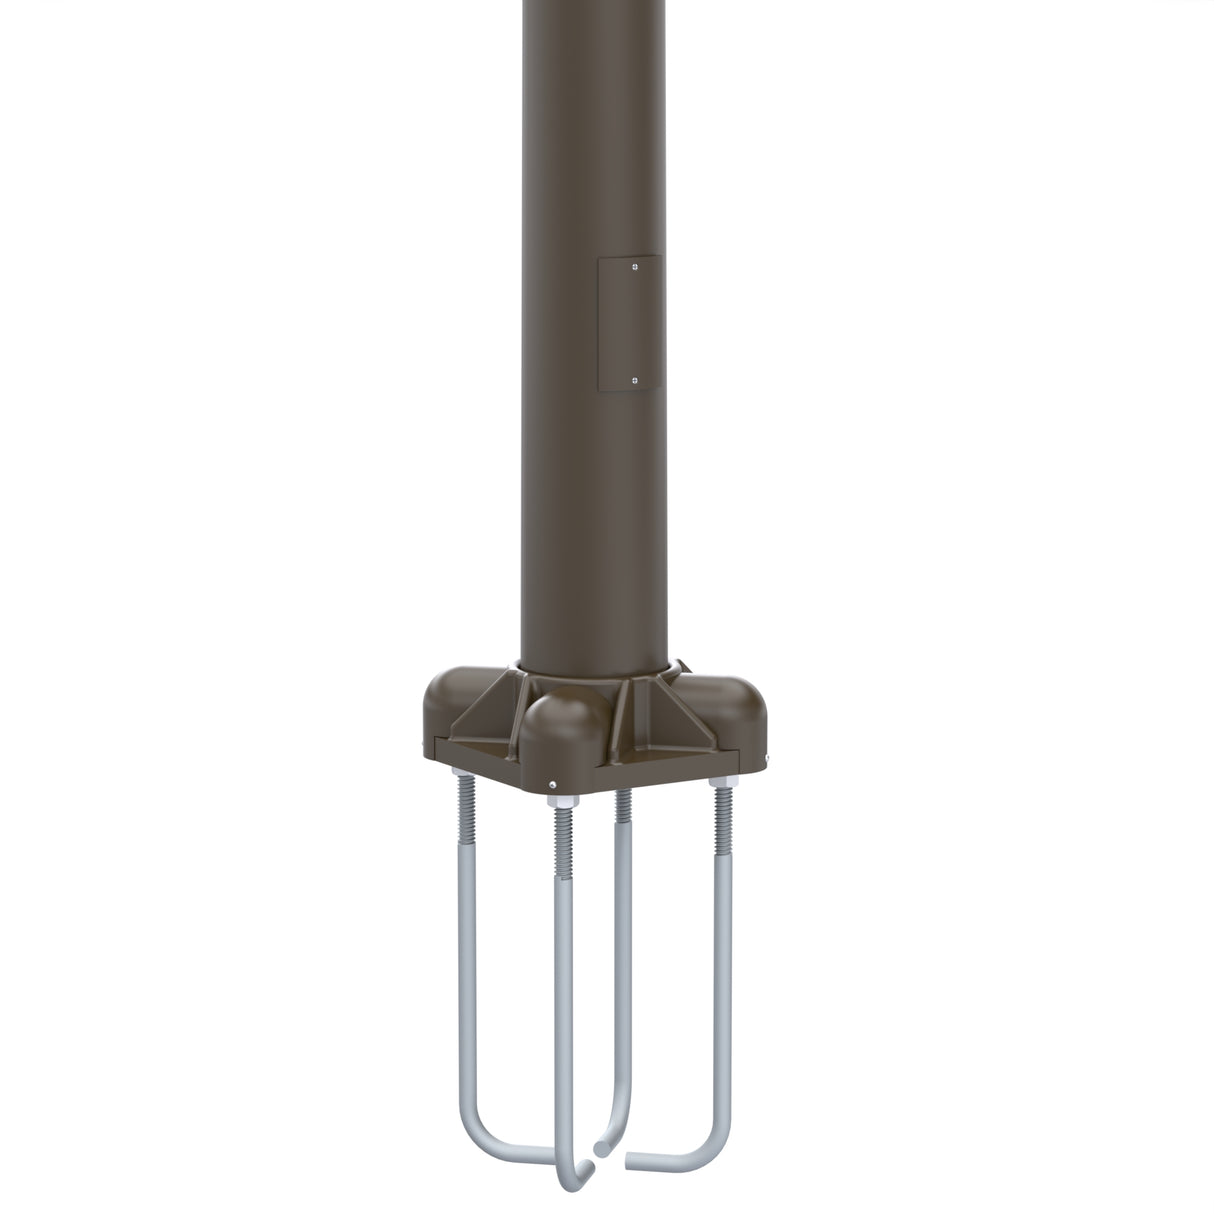 40' Tall x 8.0" Base OD x 4.5" Top OD x 0.250" Thick, Round Tapered Aluminum, Anchor Base Light Pole with 4' Davit Arm